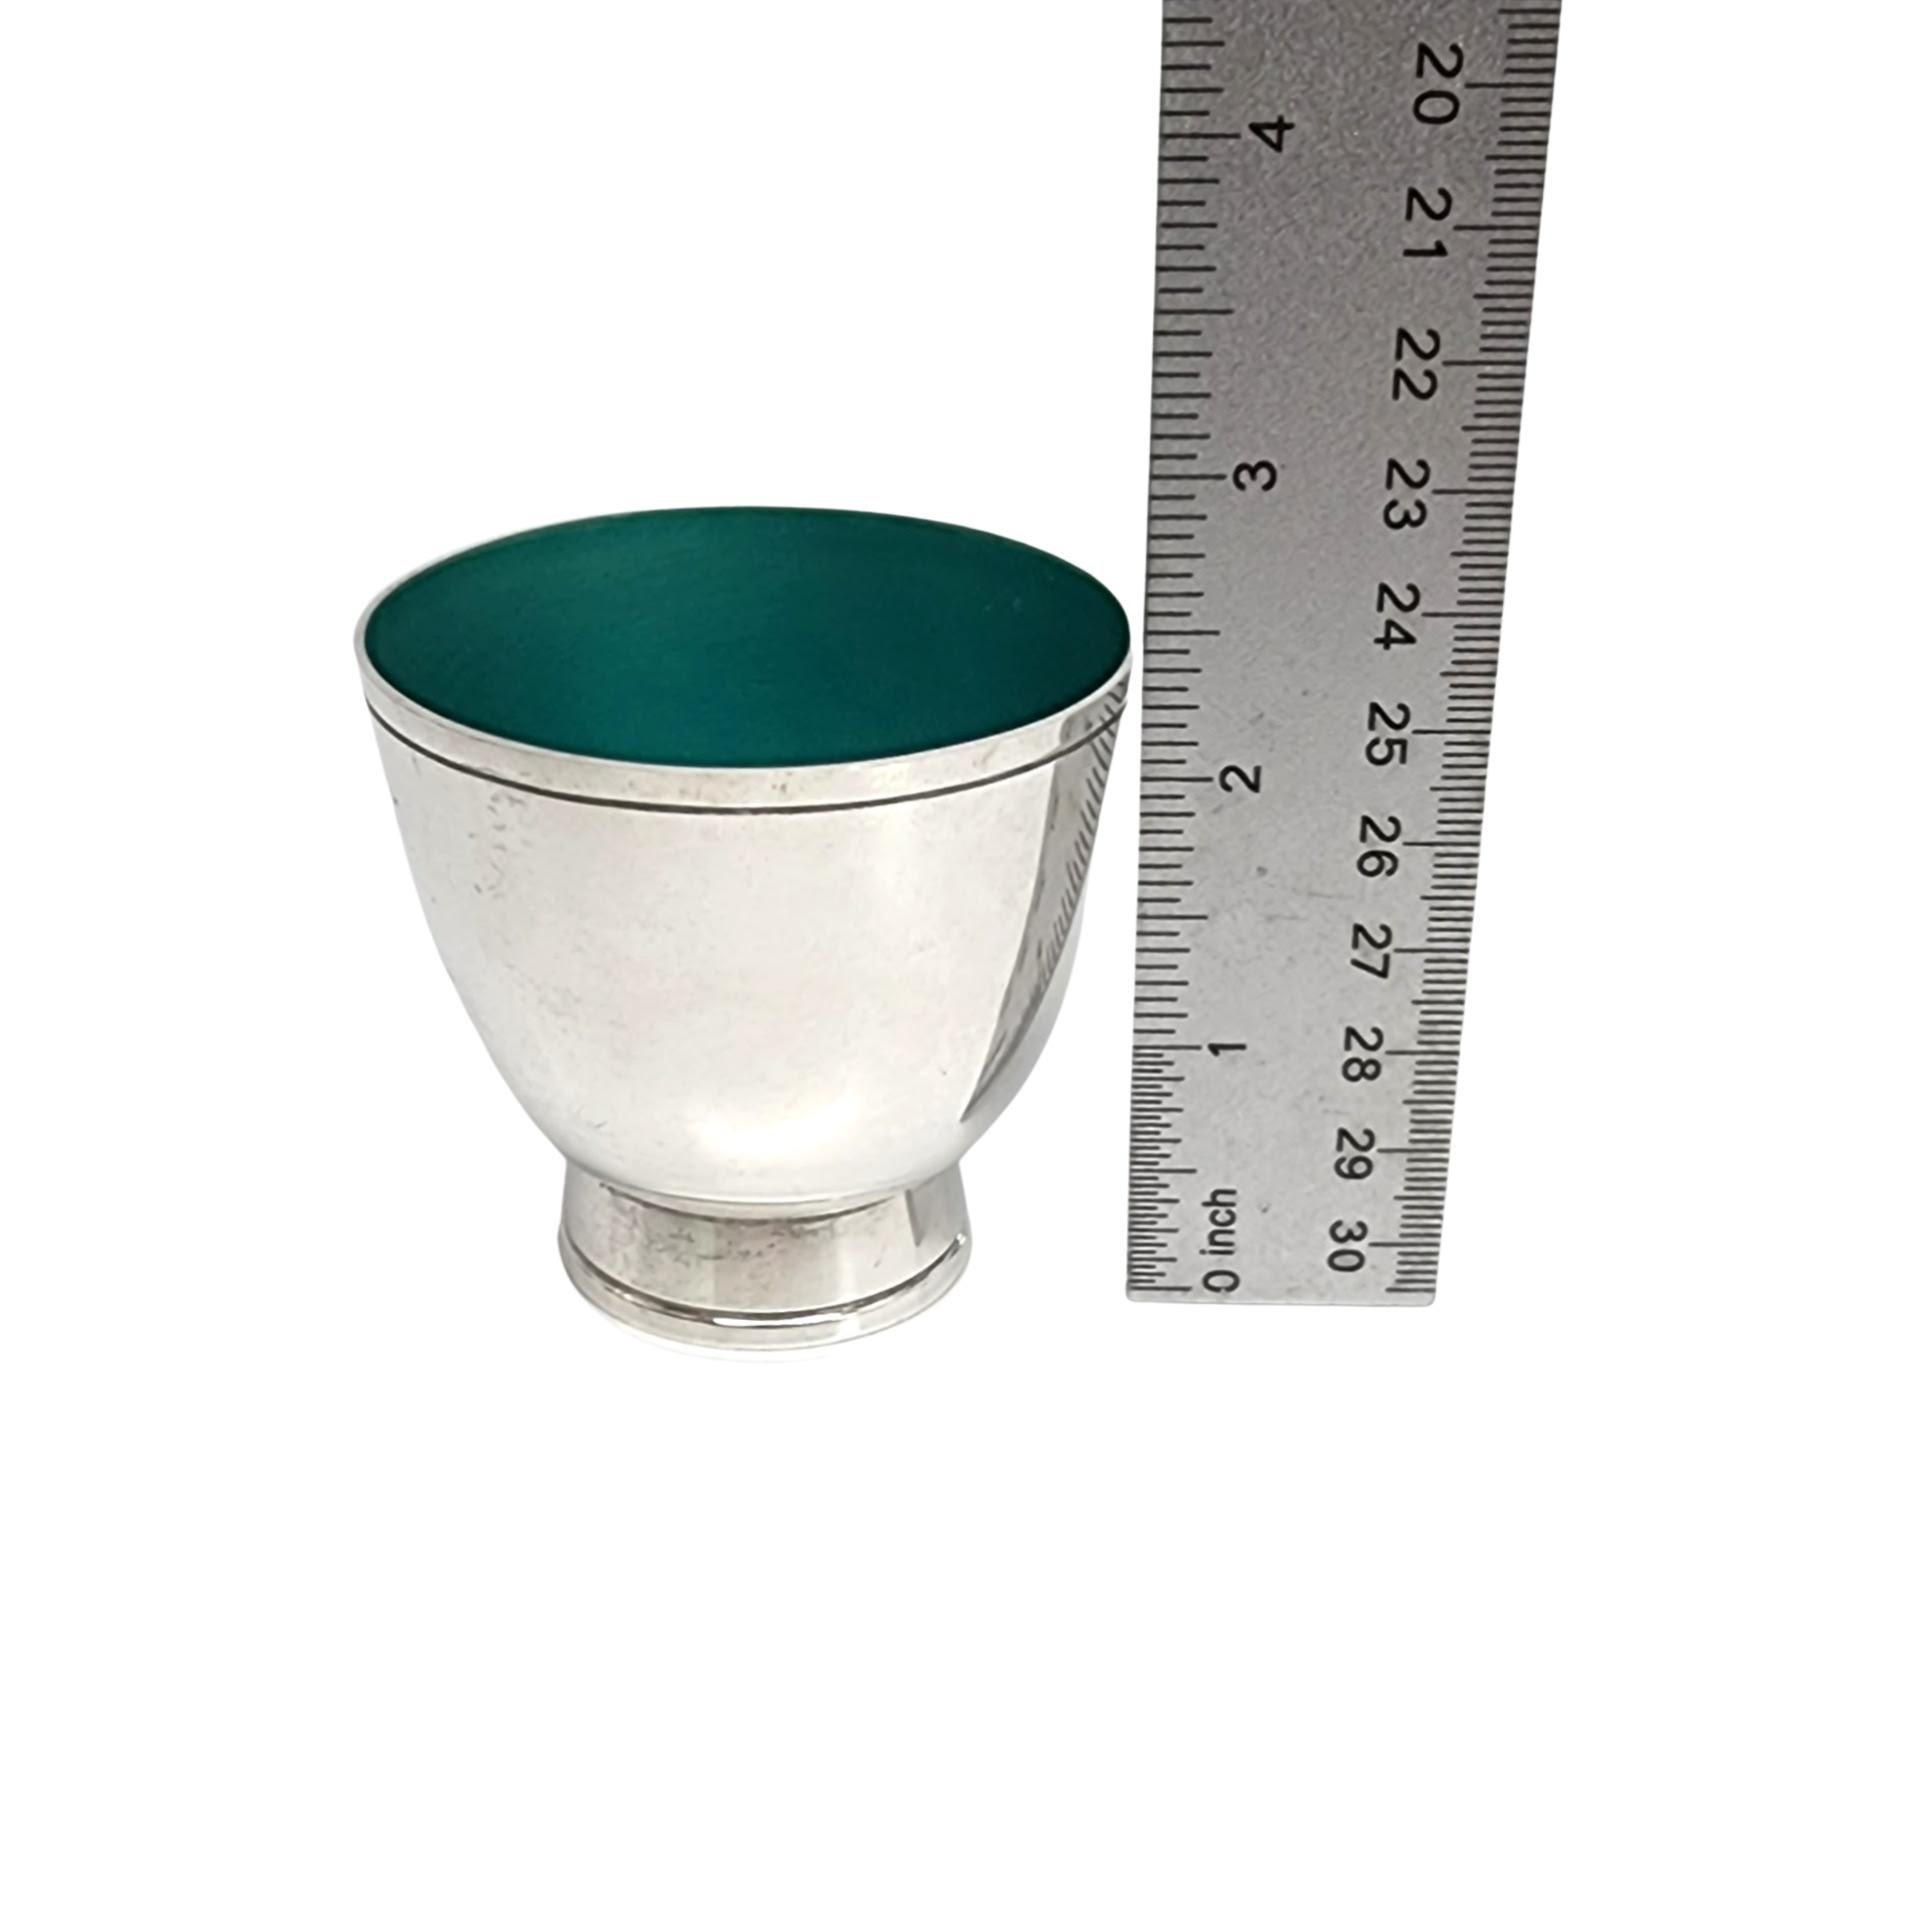 Set of 11 sterling silver and green enamel punch cups by Towle.

No monogram or engraving.

Small footed cups featuring a smooth polished finish, simple and classic line accents and vibrant green enamel interior.

Measures approx 2 5/8